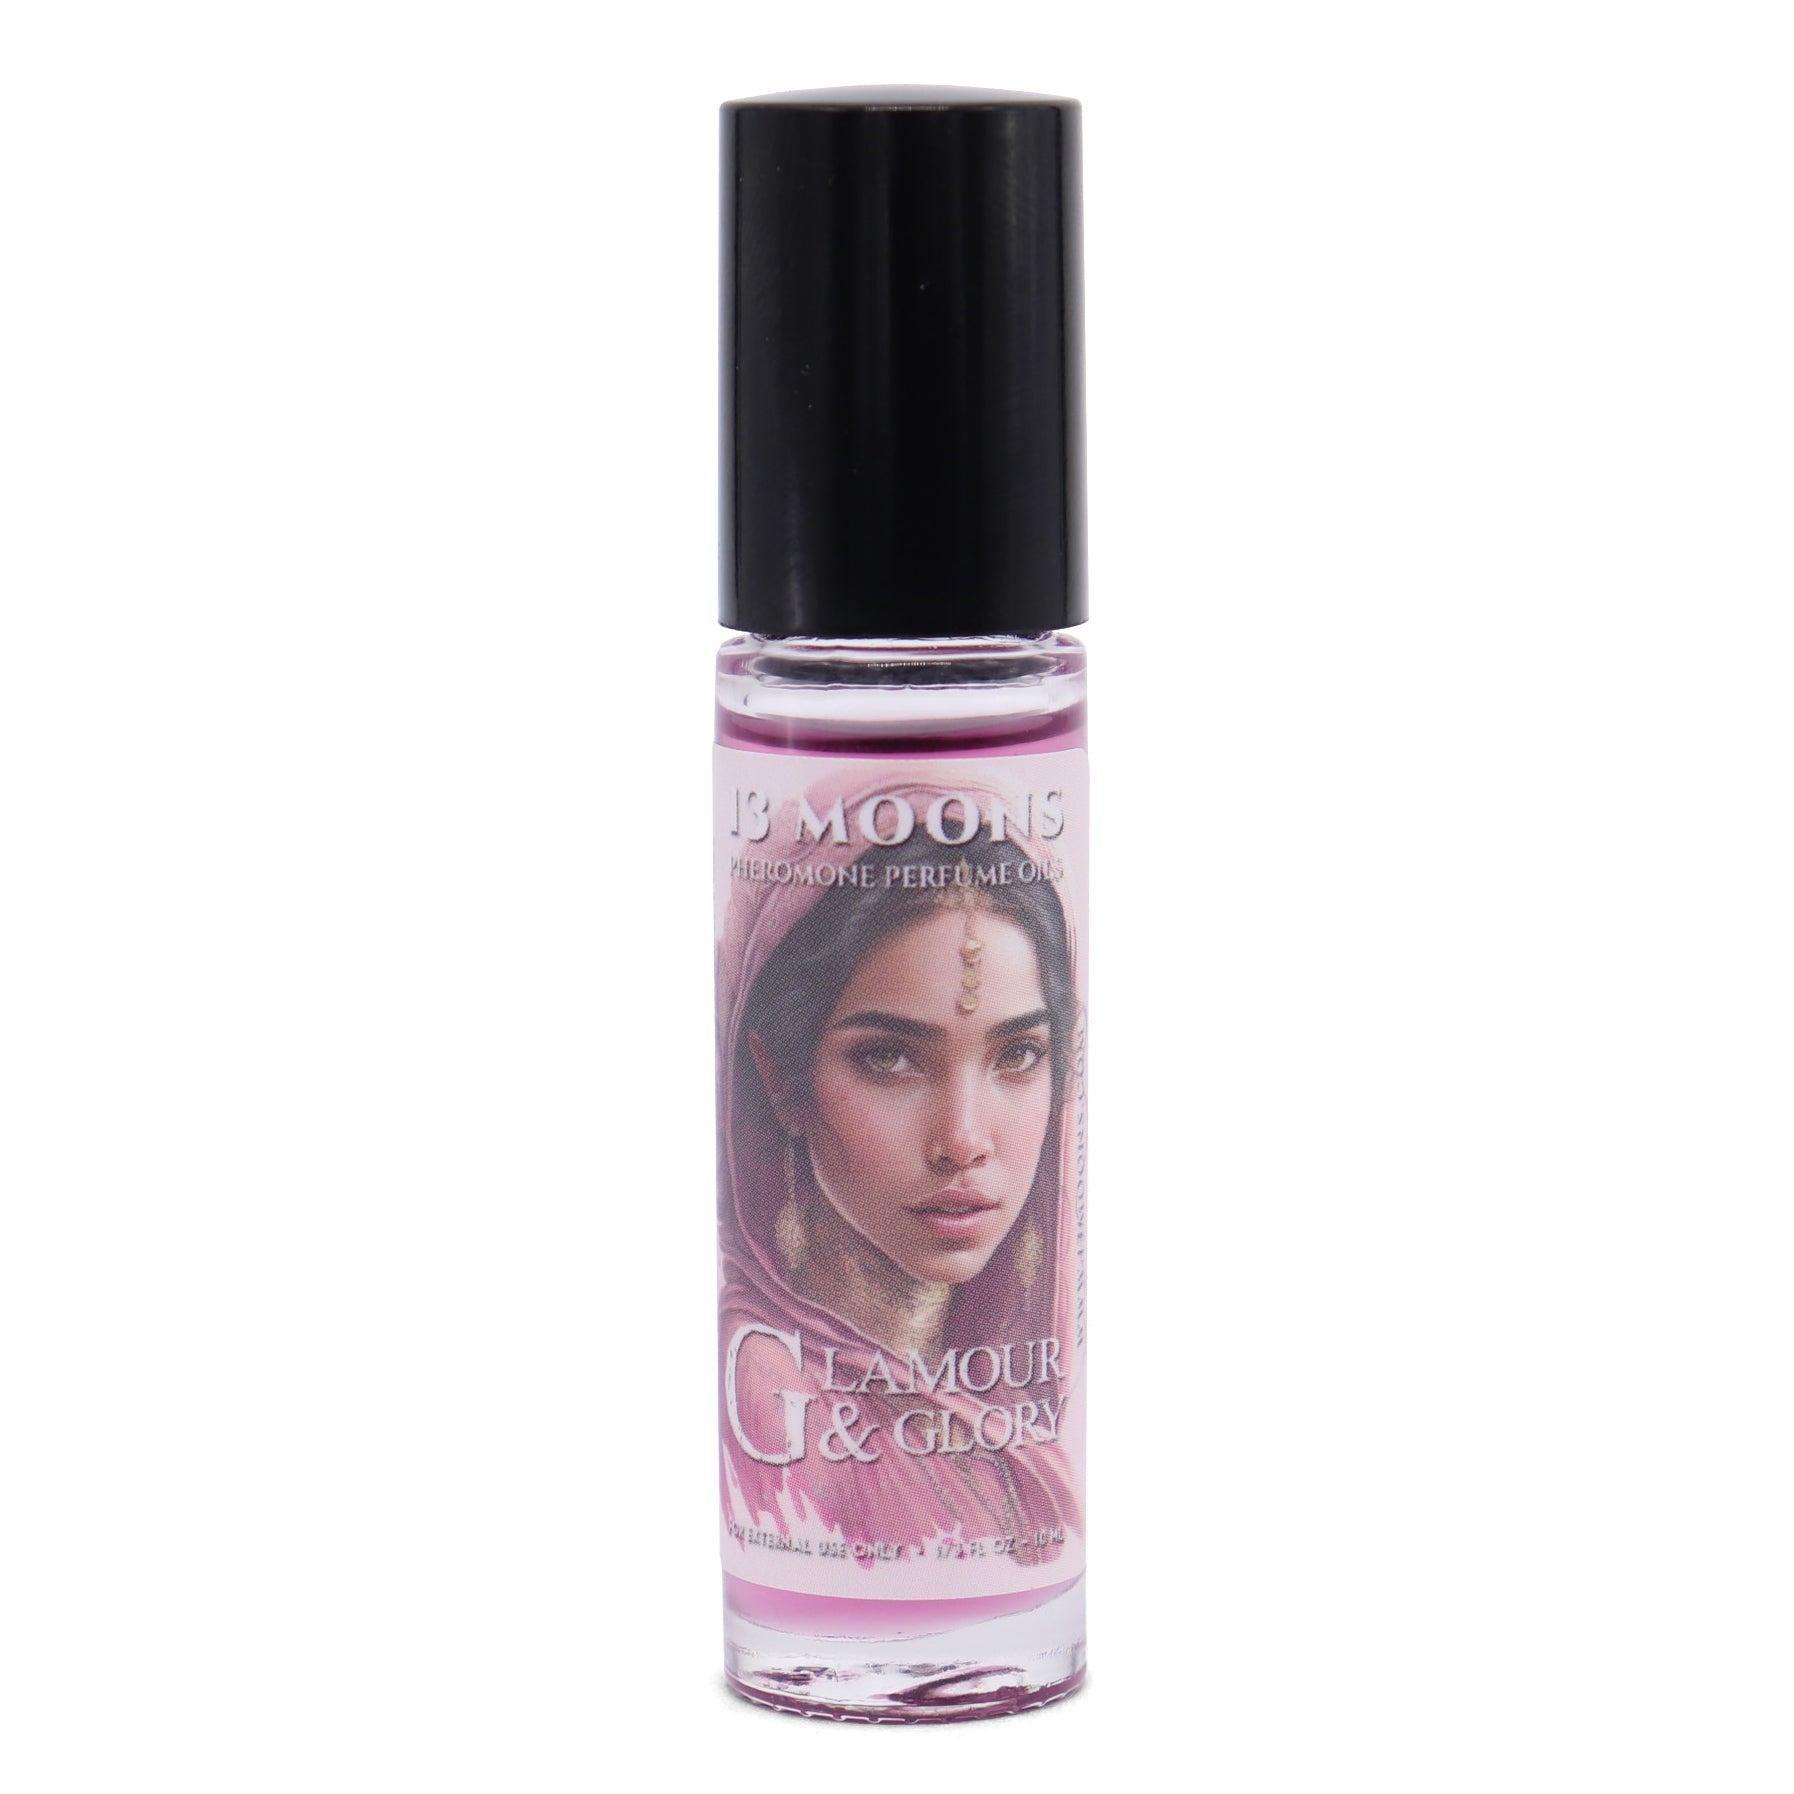 Glamour and Glory Pheromone Infused Perfume Oil by 13 Moons - 13 Moons